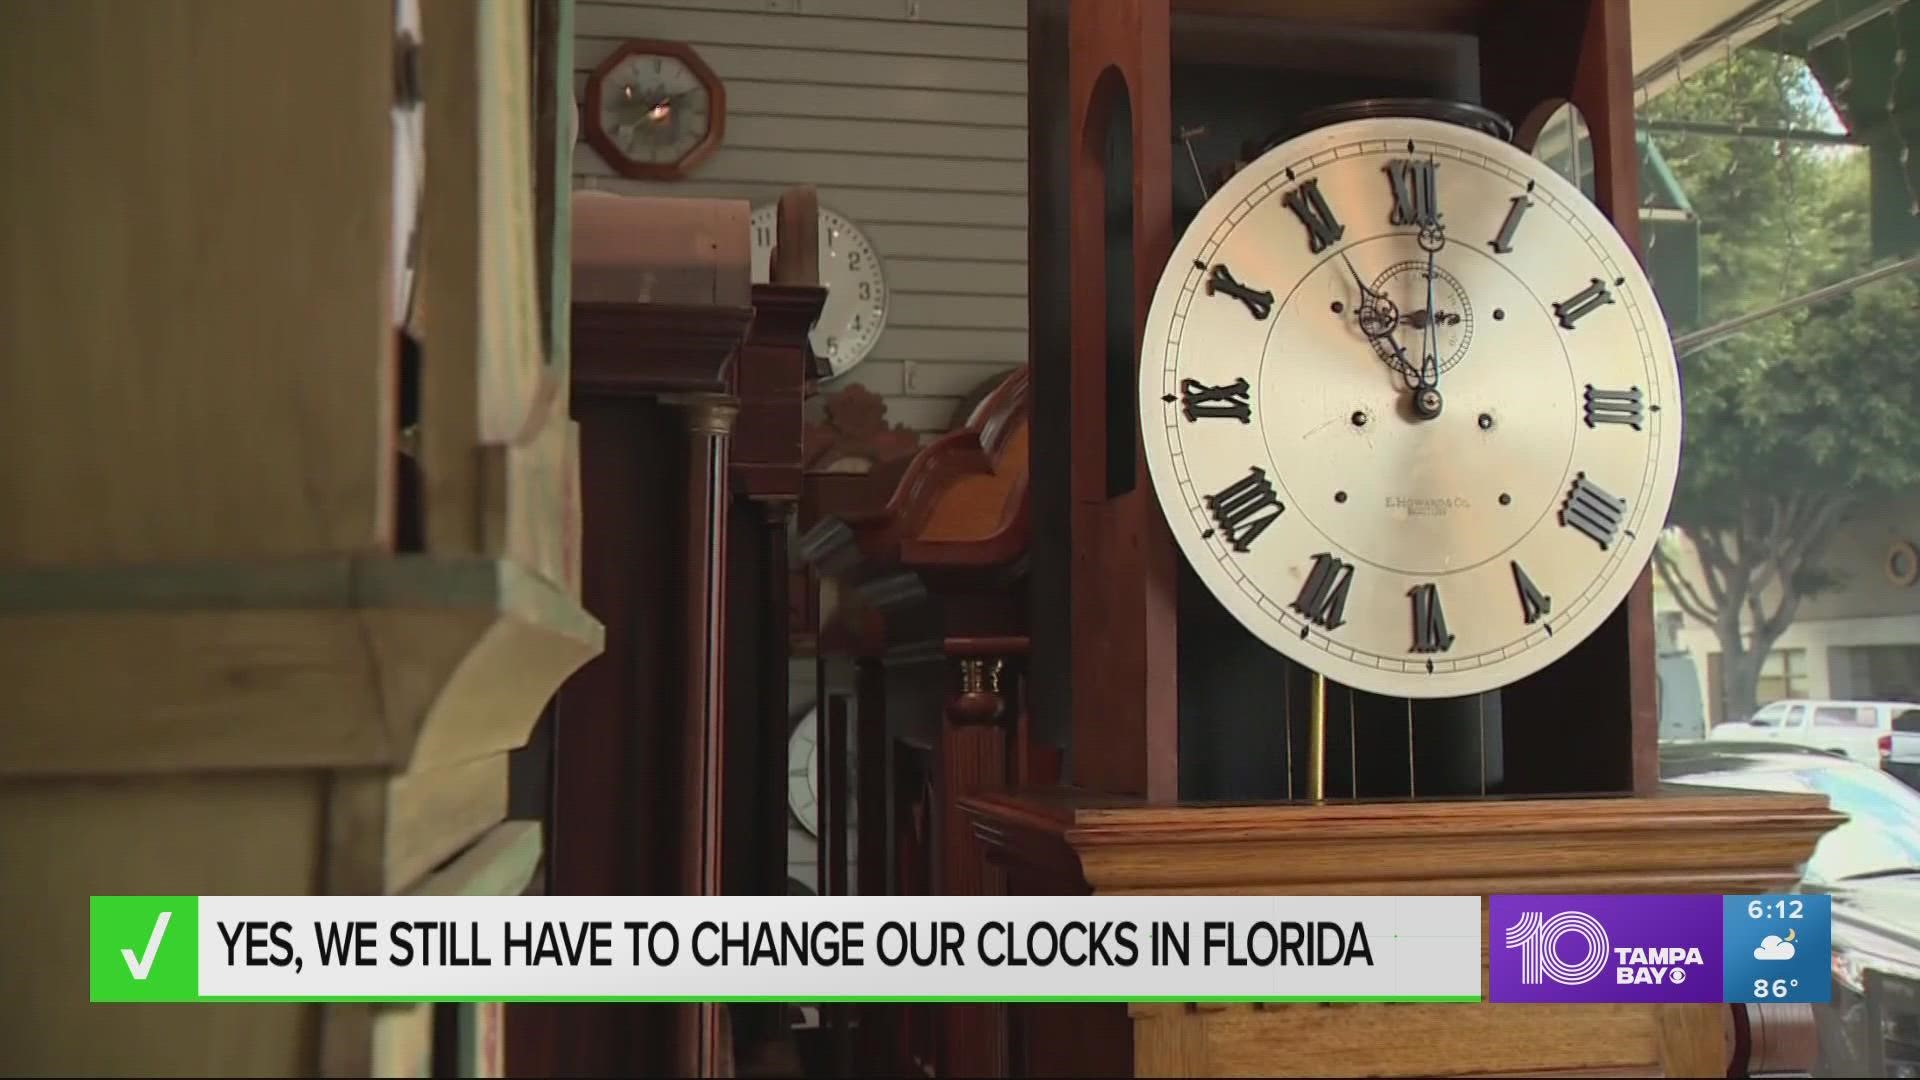 Florida lawmakers voted to "lock the clock" in 2018 to keep daylight saving time permanent but congressional approval is required and that hasn't happened yet.